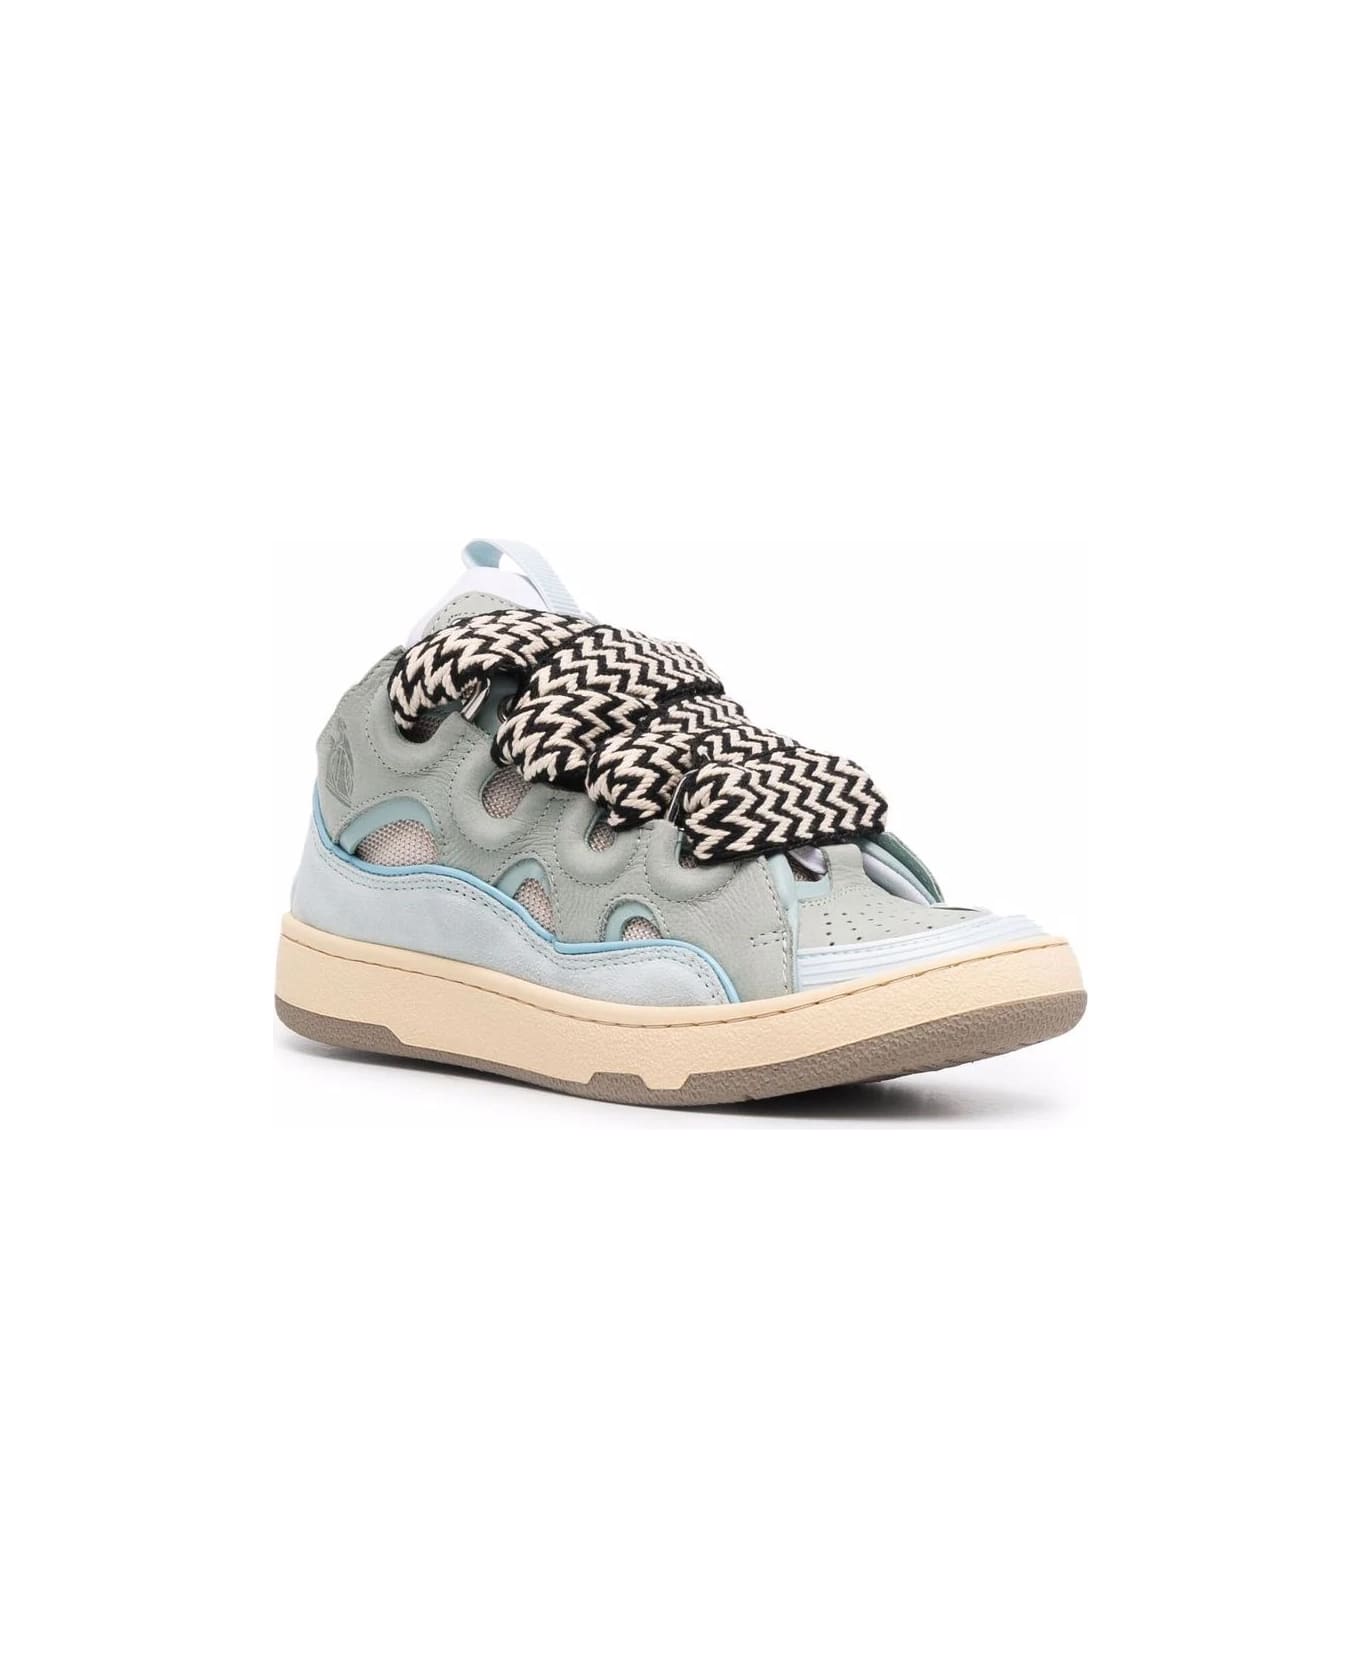 Lanvin Curb Sneakers In Light Blue Leather - Blue